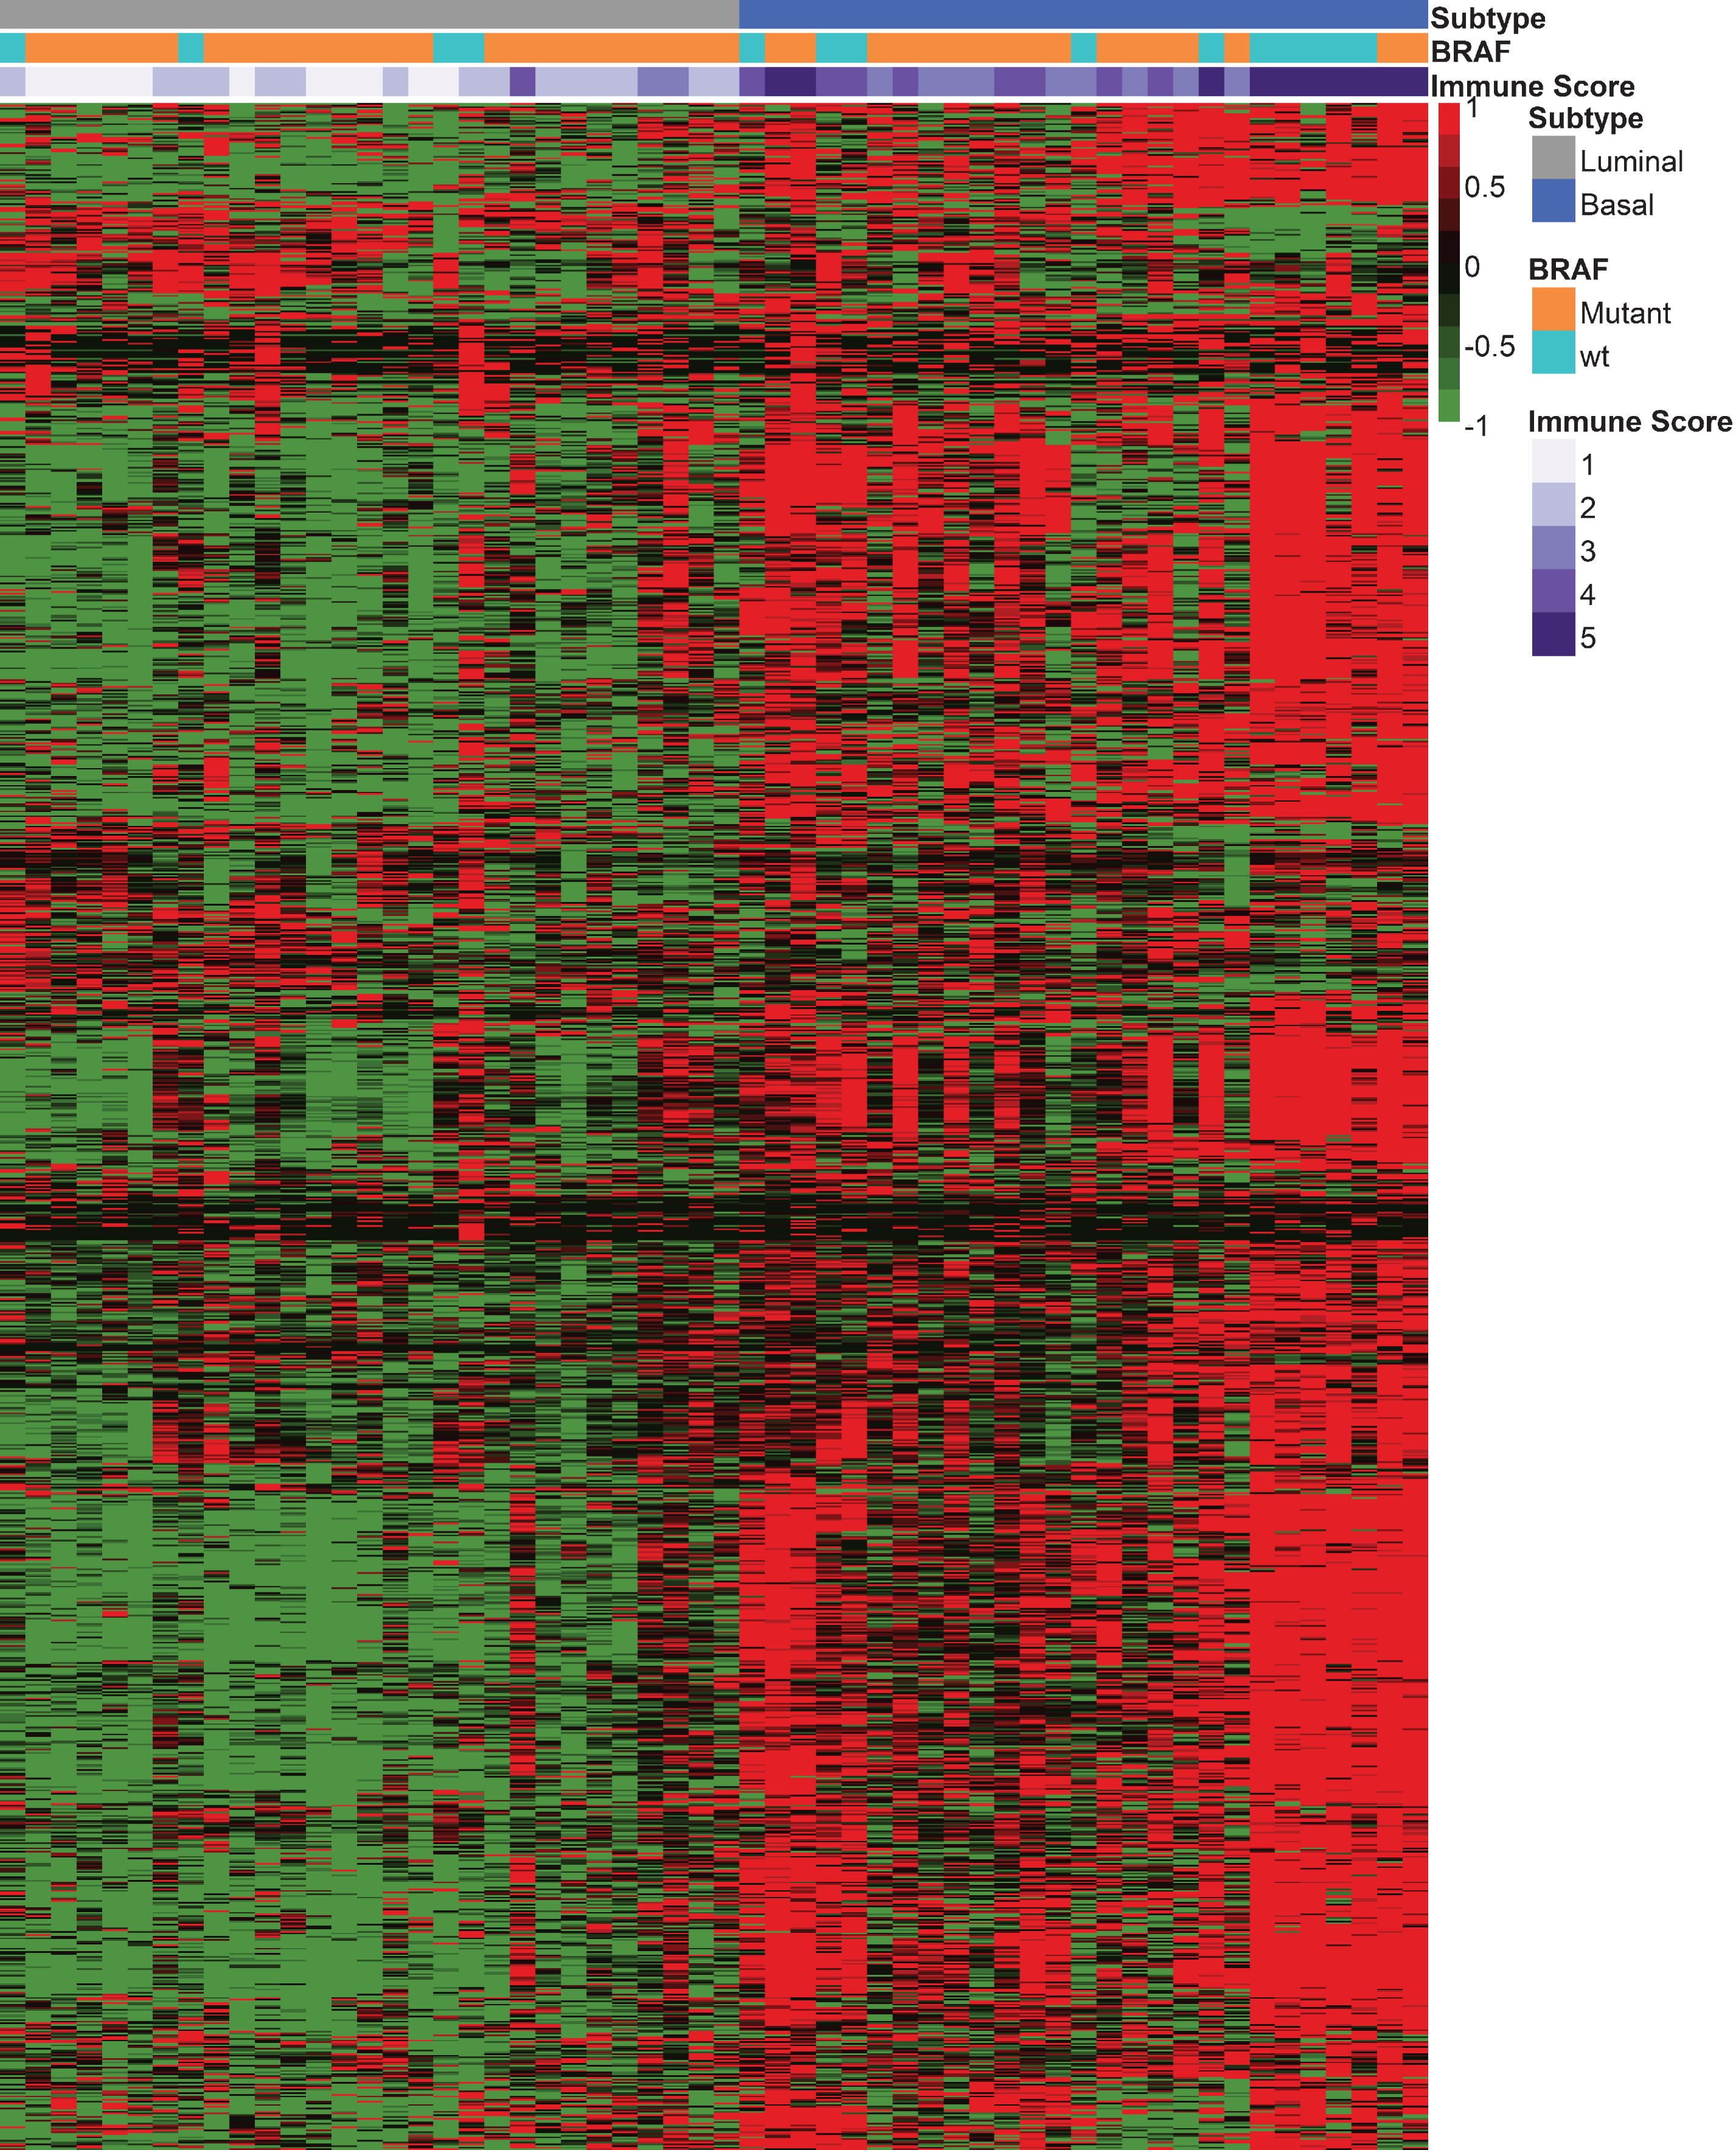 Canine InvUC RNA-seq analyses. In the heatmap, the luminal and basal subtype samples (gray and blue column headings, respectively) were defined by class prediction model [21]. The data were interrogated for genes that classify human InvUC as T-cell-inflamed (n = 1797) [31]. Note that the expression of genes related to immune infiltration (red color in the heatmap) predominate in the basal subtype tumors (OR 52.22, 95%CI 4.68–582.38, P = 0.001). The genes in the heatmap are listed in Supplementary Table S3 in the same order as they appear in the figure.